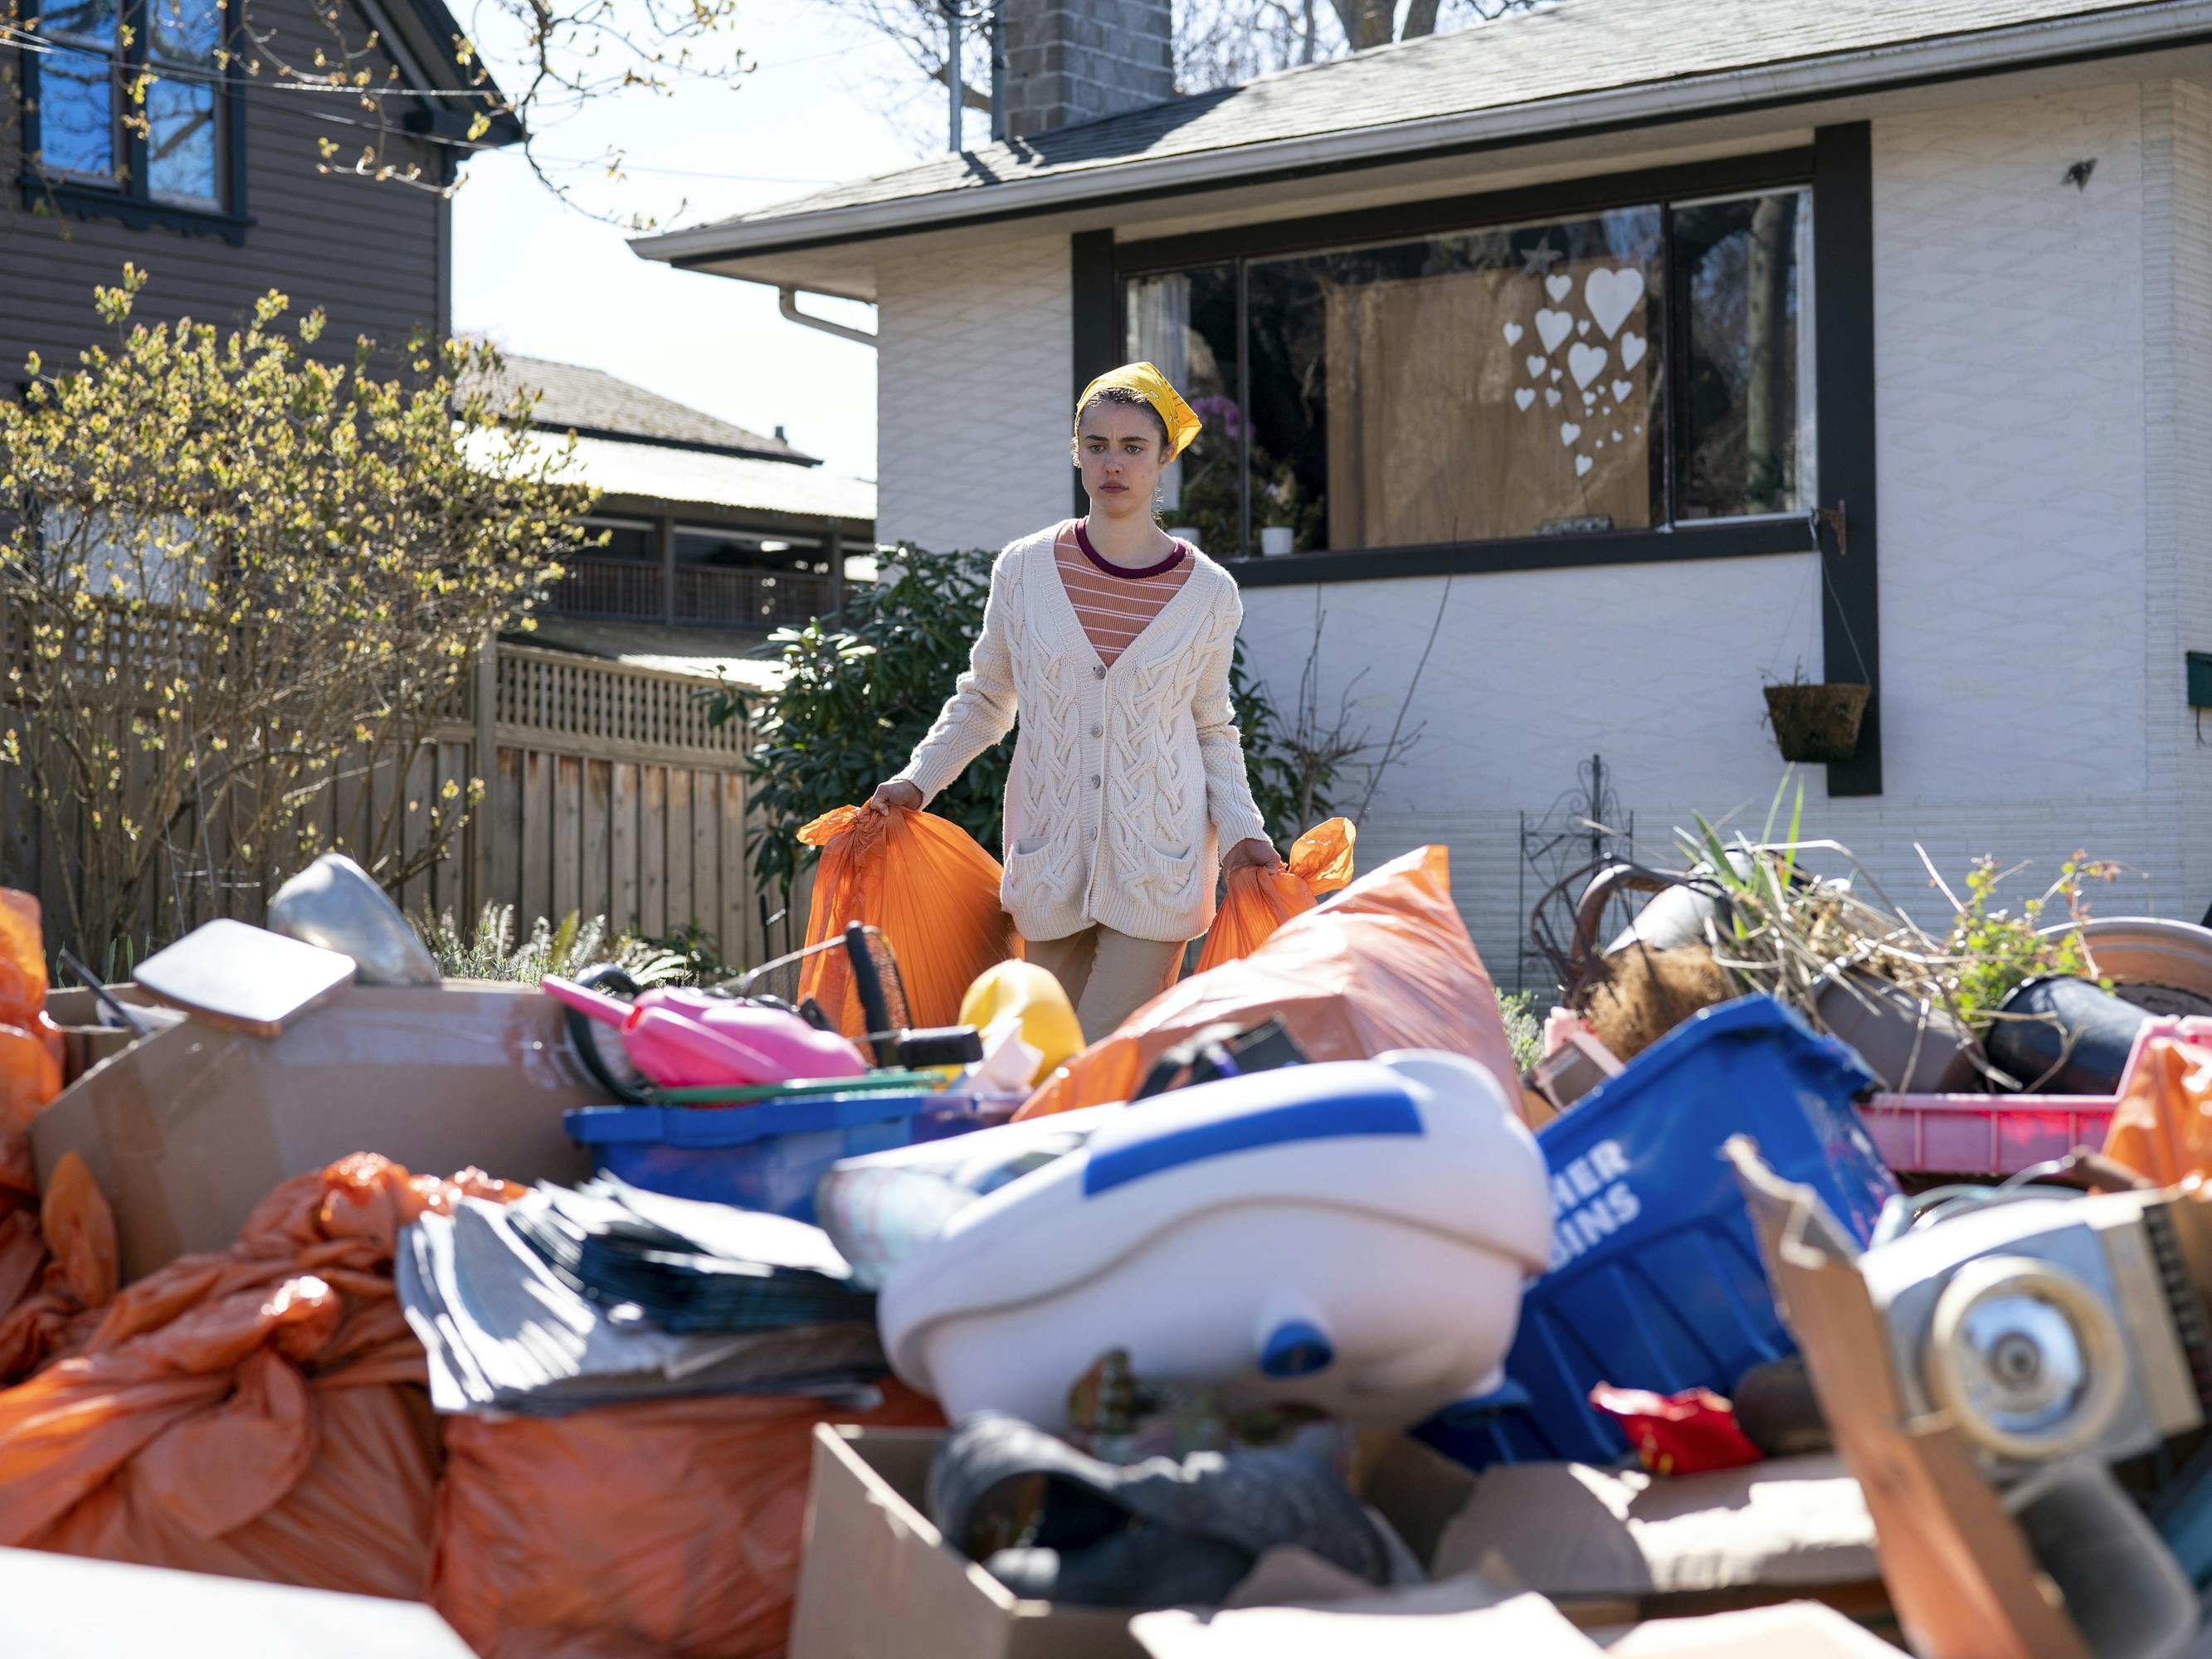 Alex Russell (Margaret Qualley) stands amongst a yard full of junk. She wears an oatmeal cardigan and a yellow bandana. 